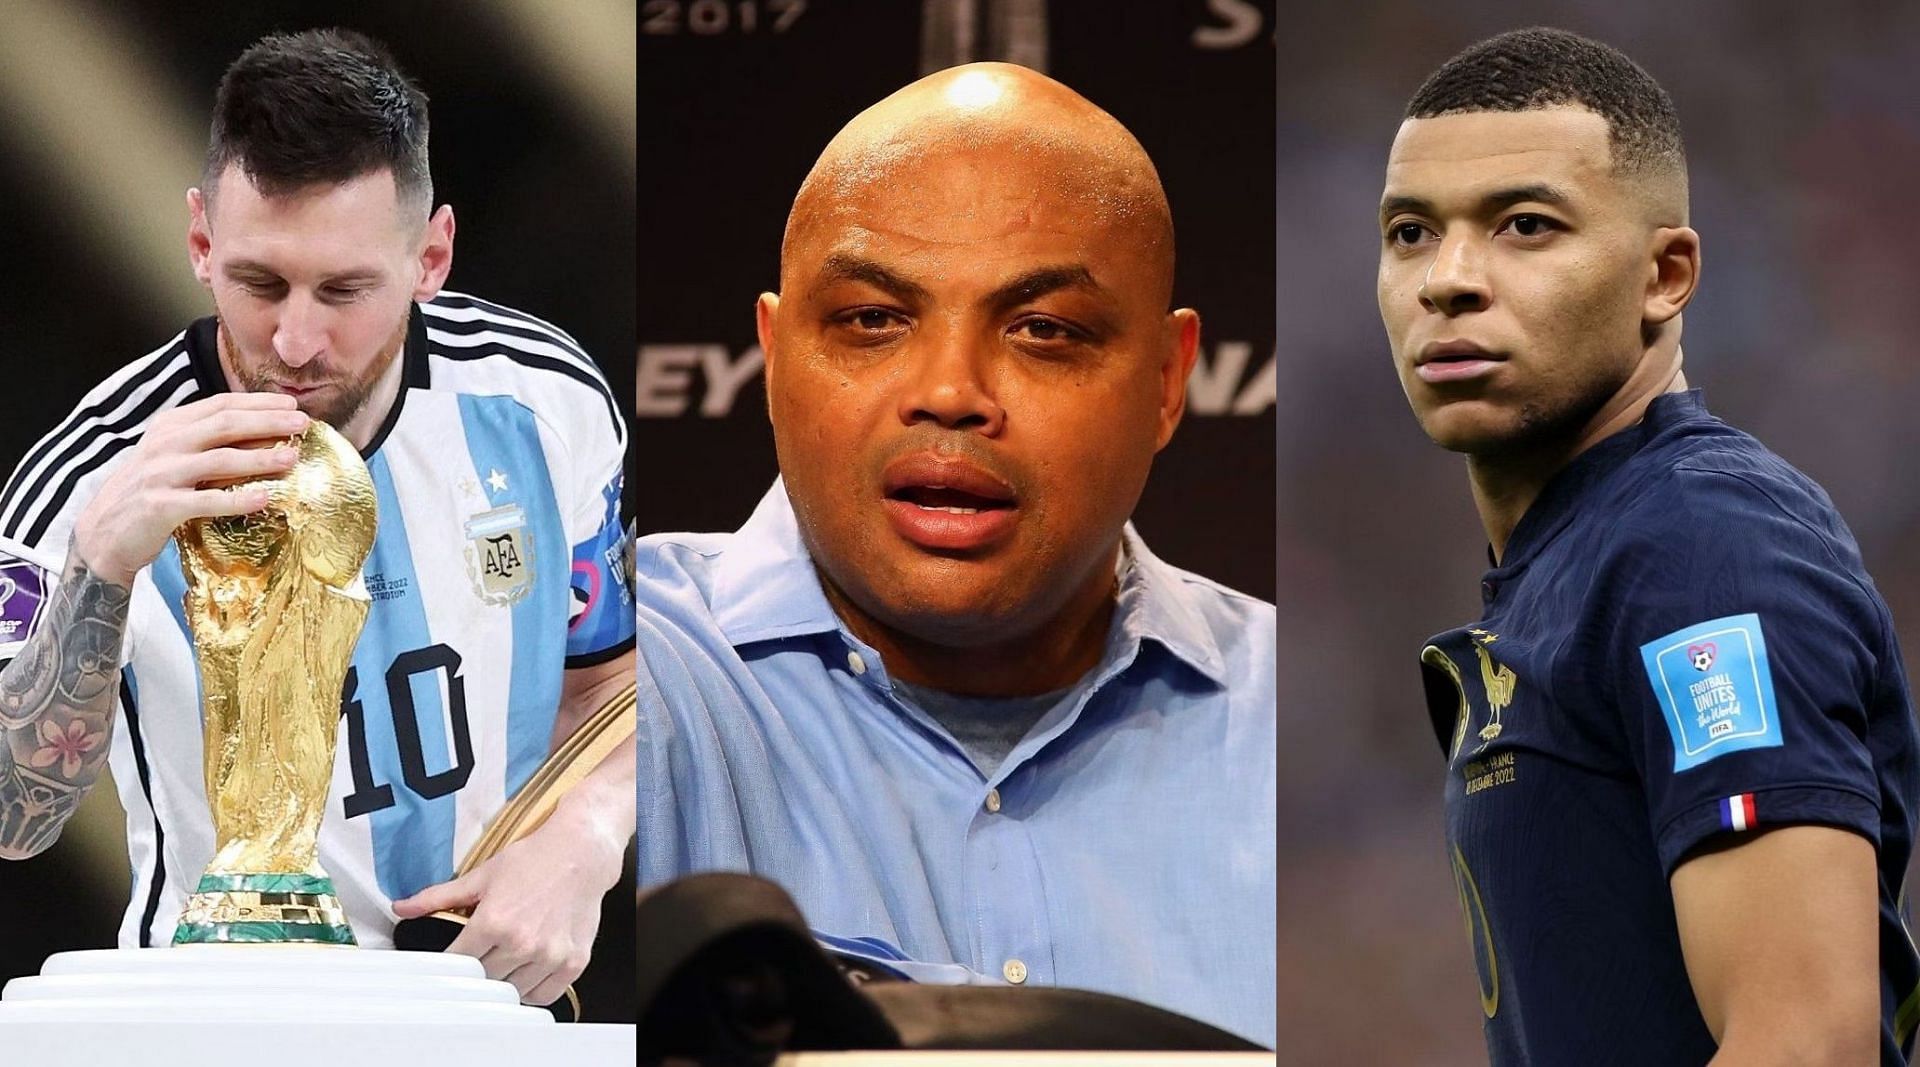 Lionel Messi, Charles Barkley and Kylian Mbappe